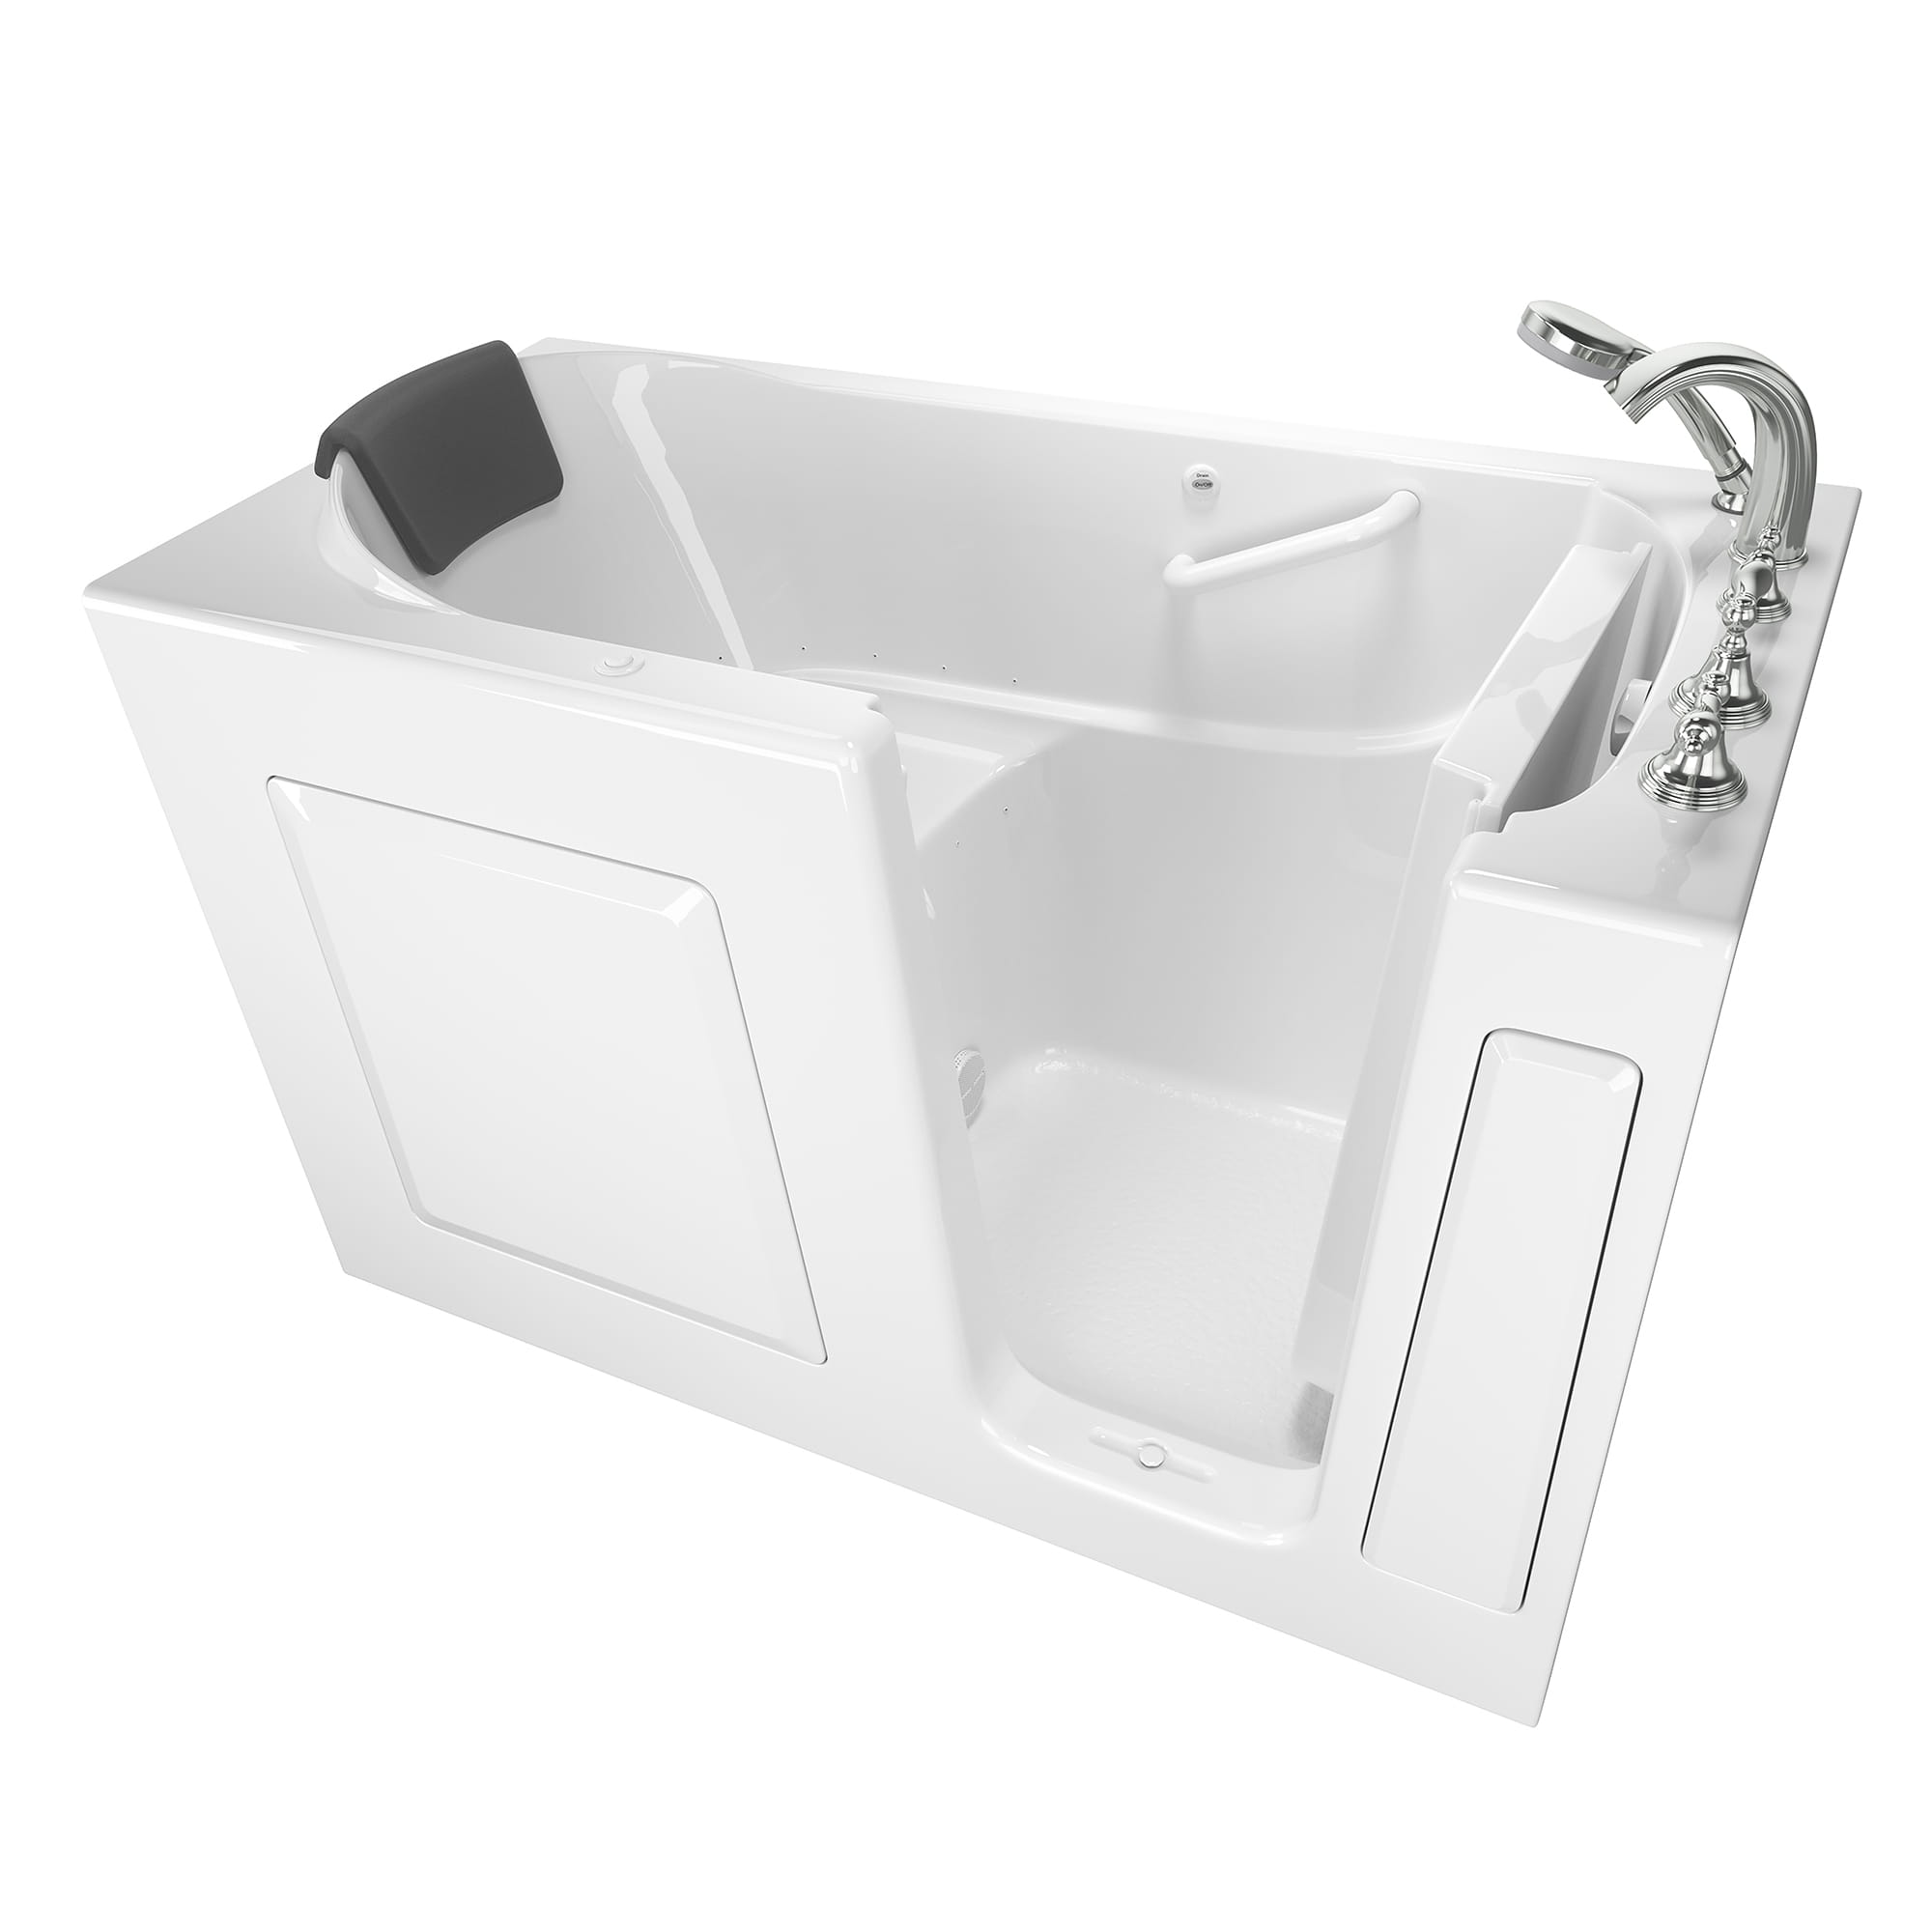 Gelcoat Premium Series 30 x 60 -Inch Walk-in Tub With Air Spa System - Right-Hand Drain With Faucet